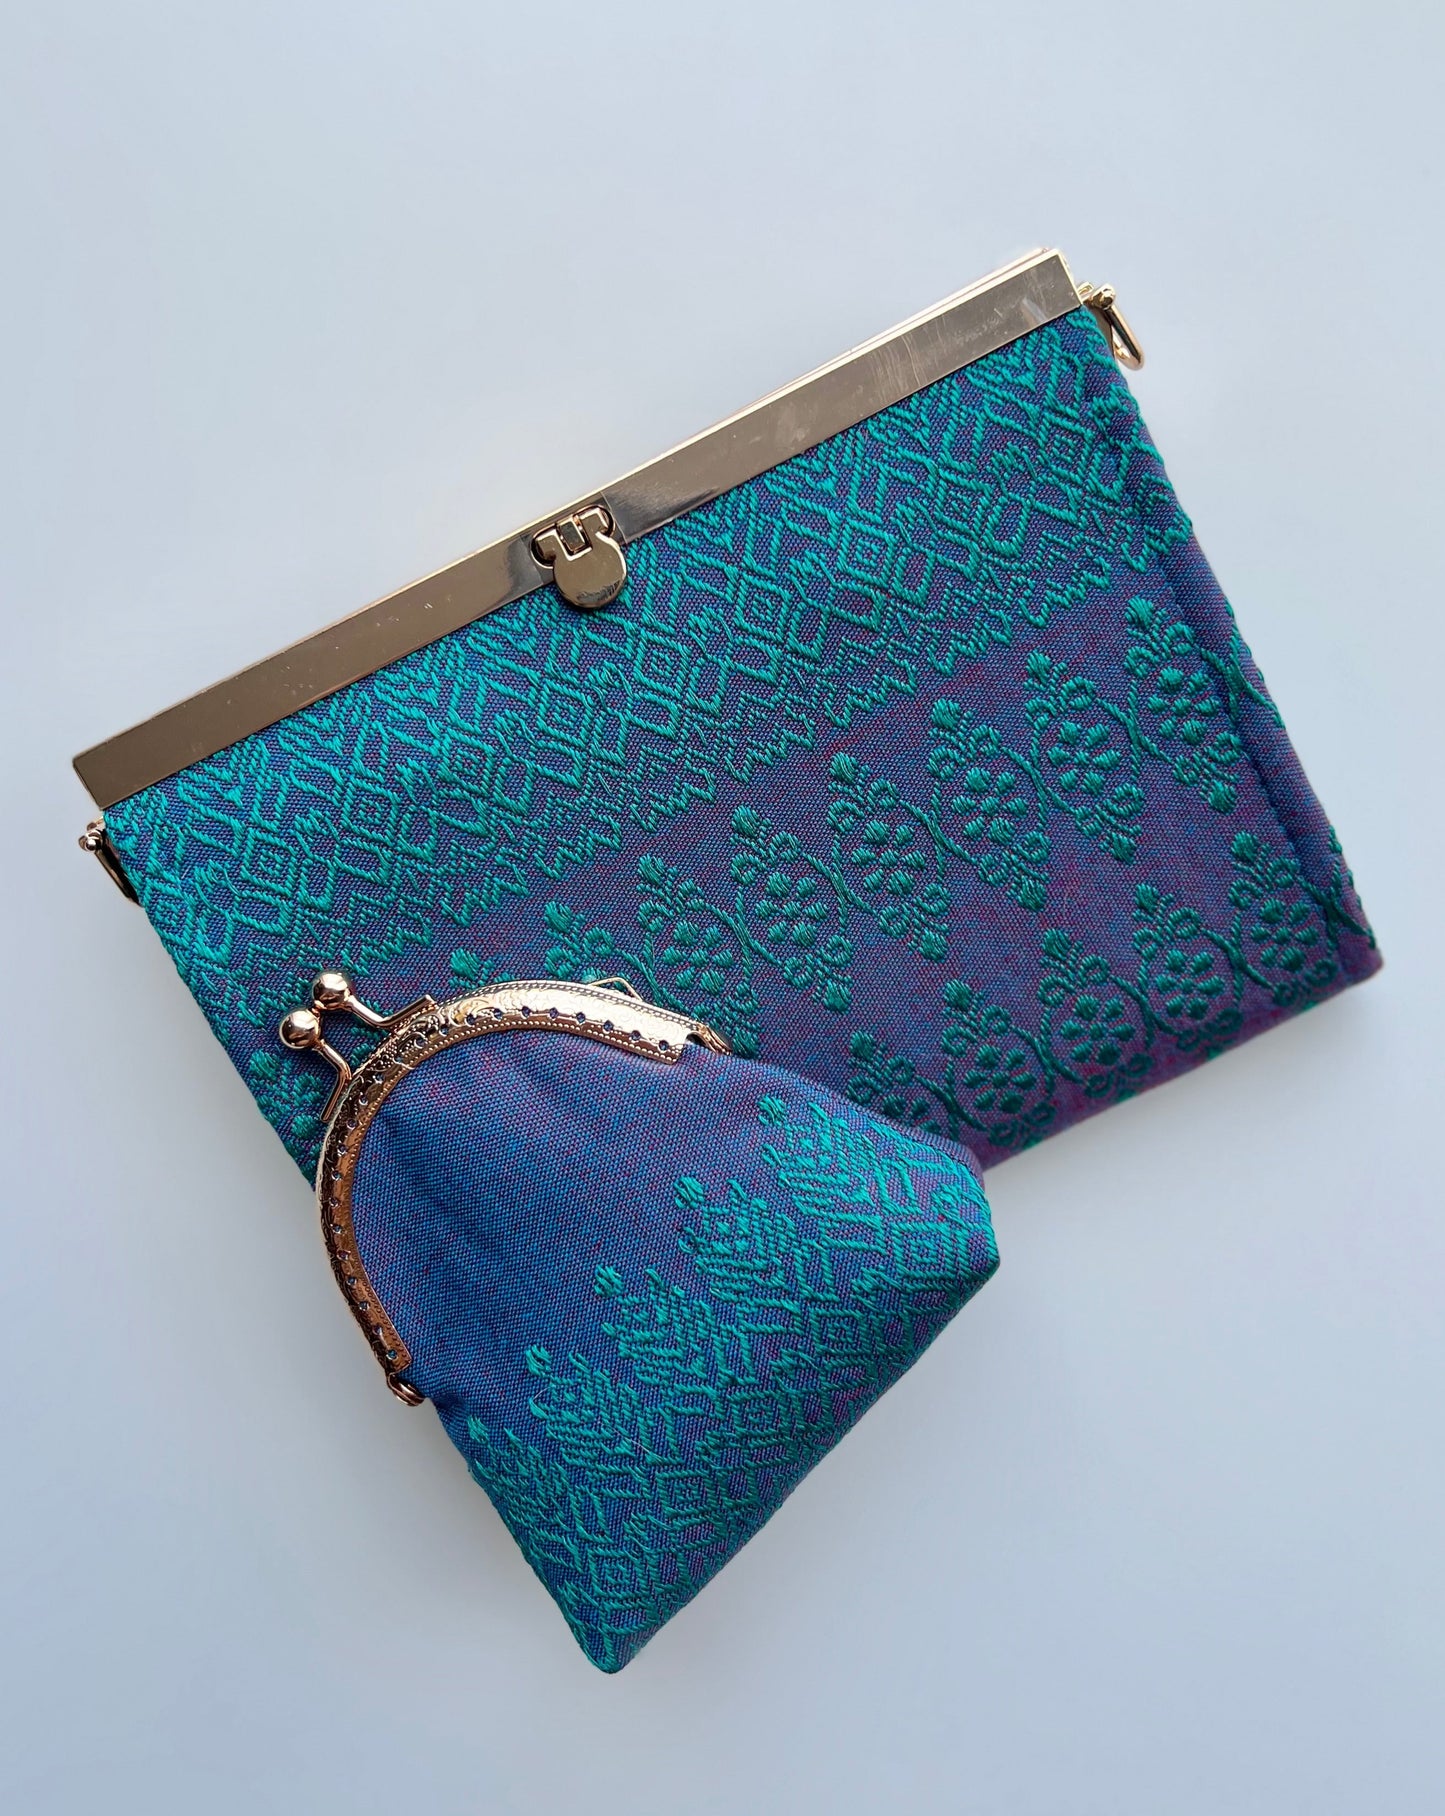 Purse/Clutch+Coin Pouch || Shimmering Seung Khmer